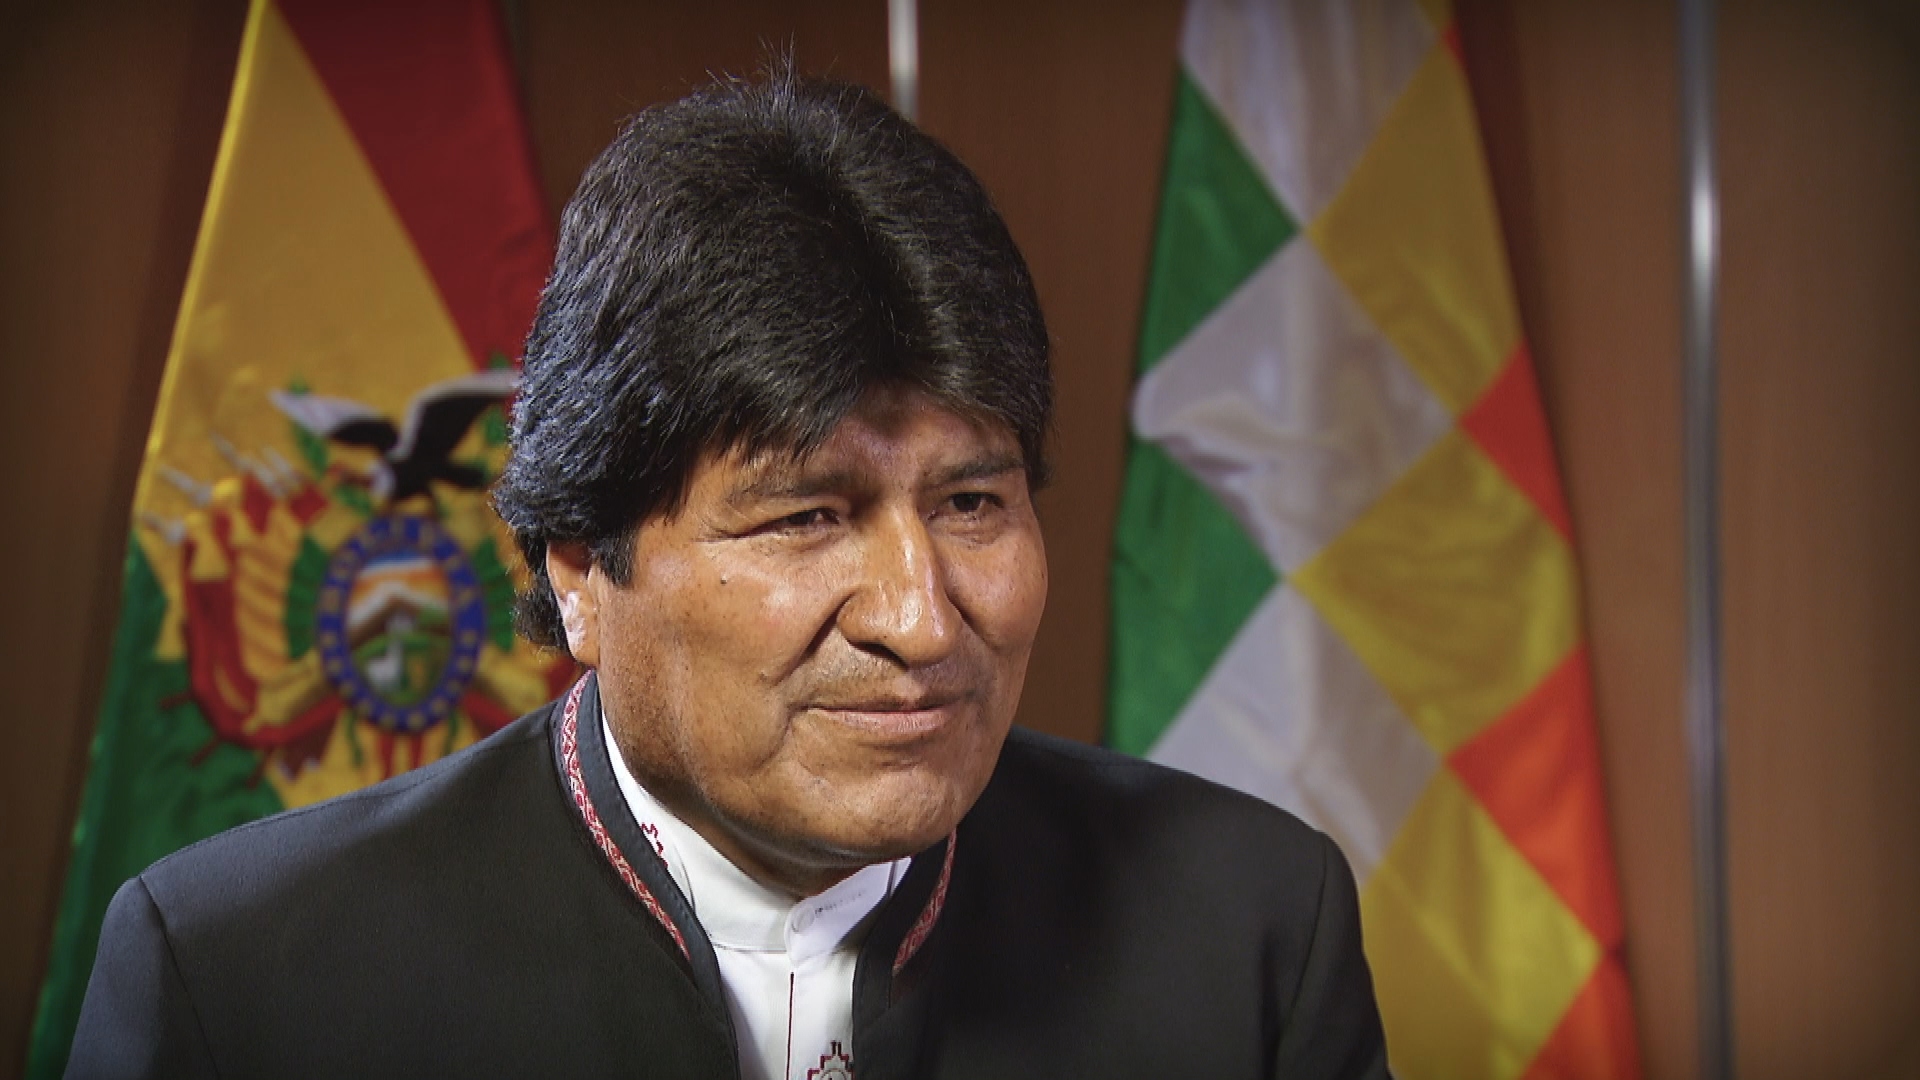 An interview with Bolivian President Evo Morales | CGTN America